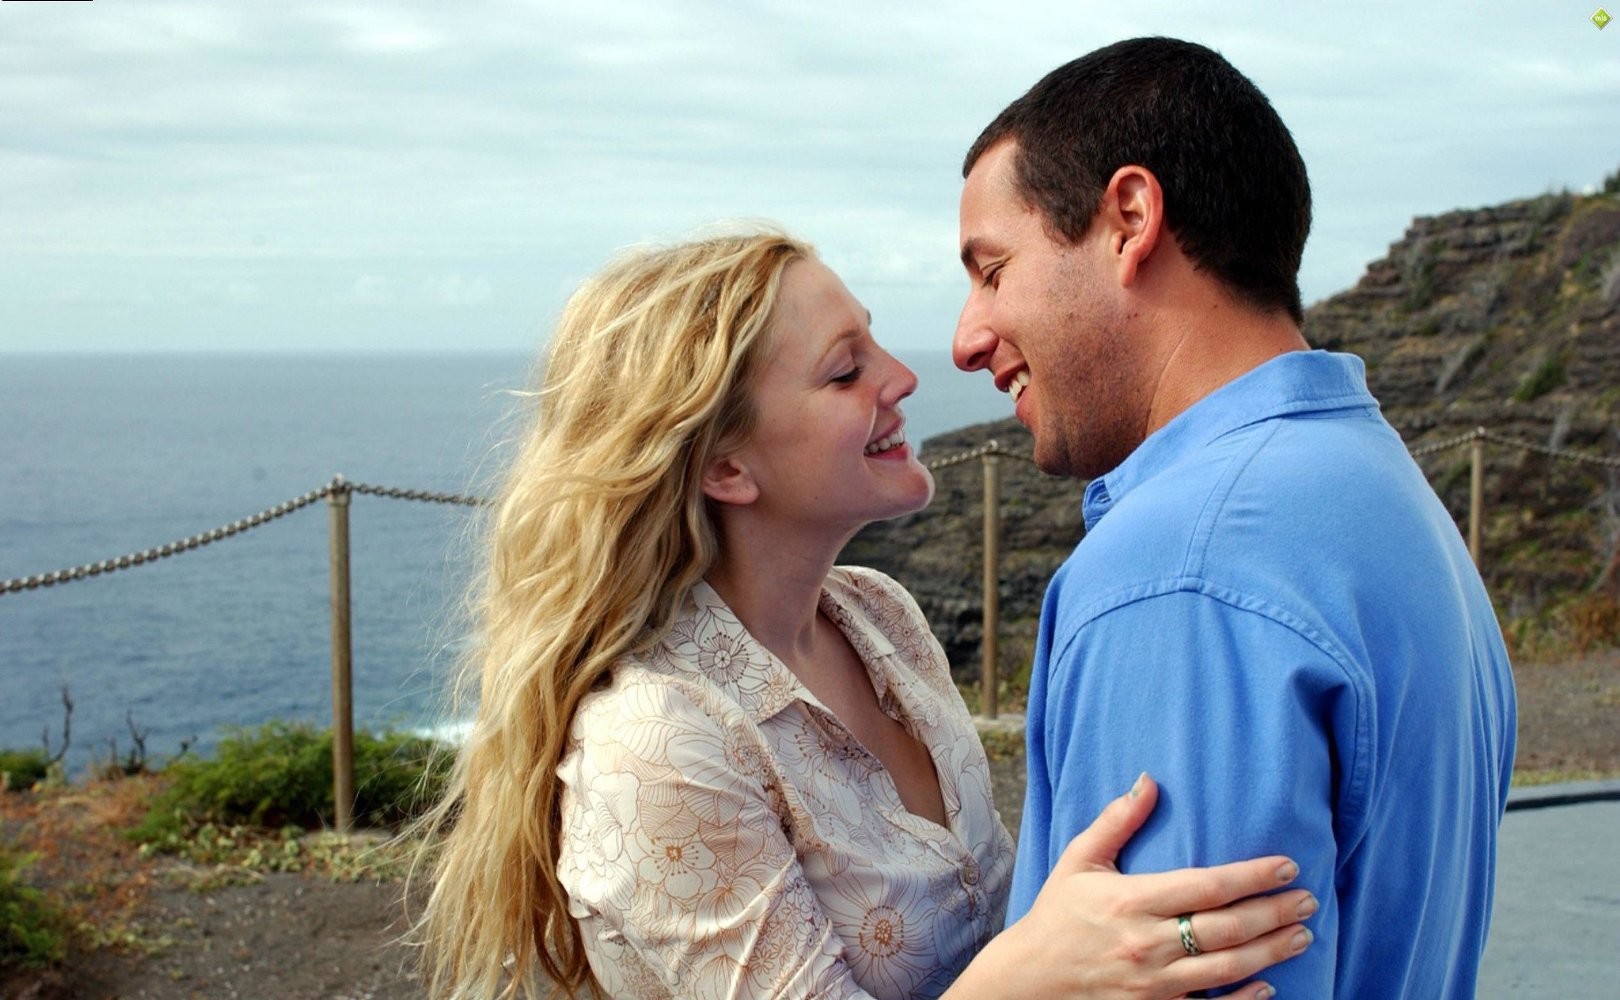 50 first dates review